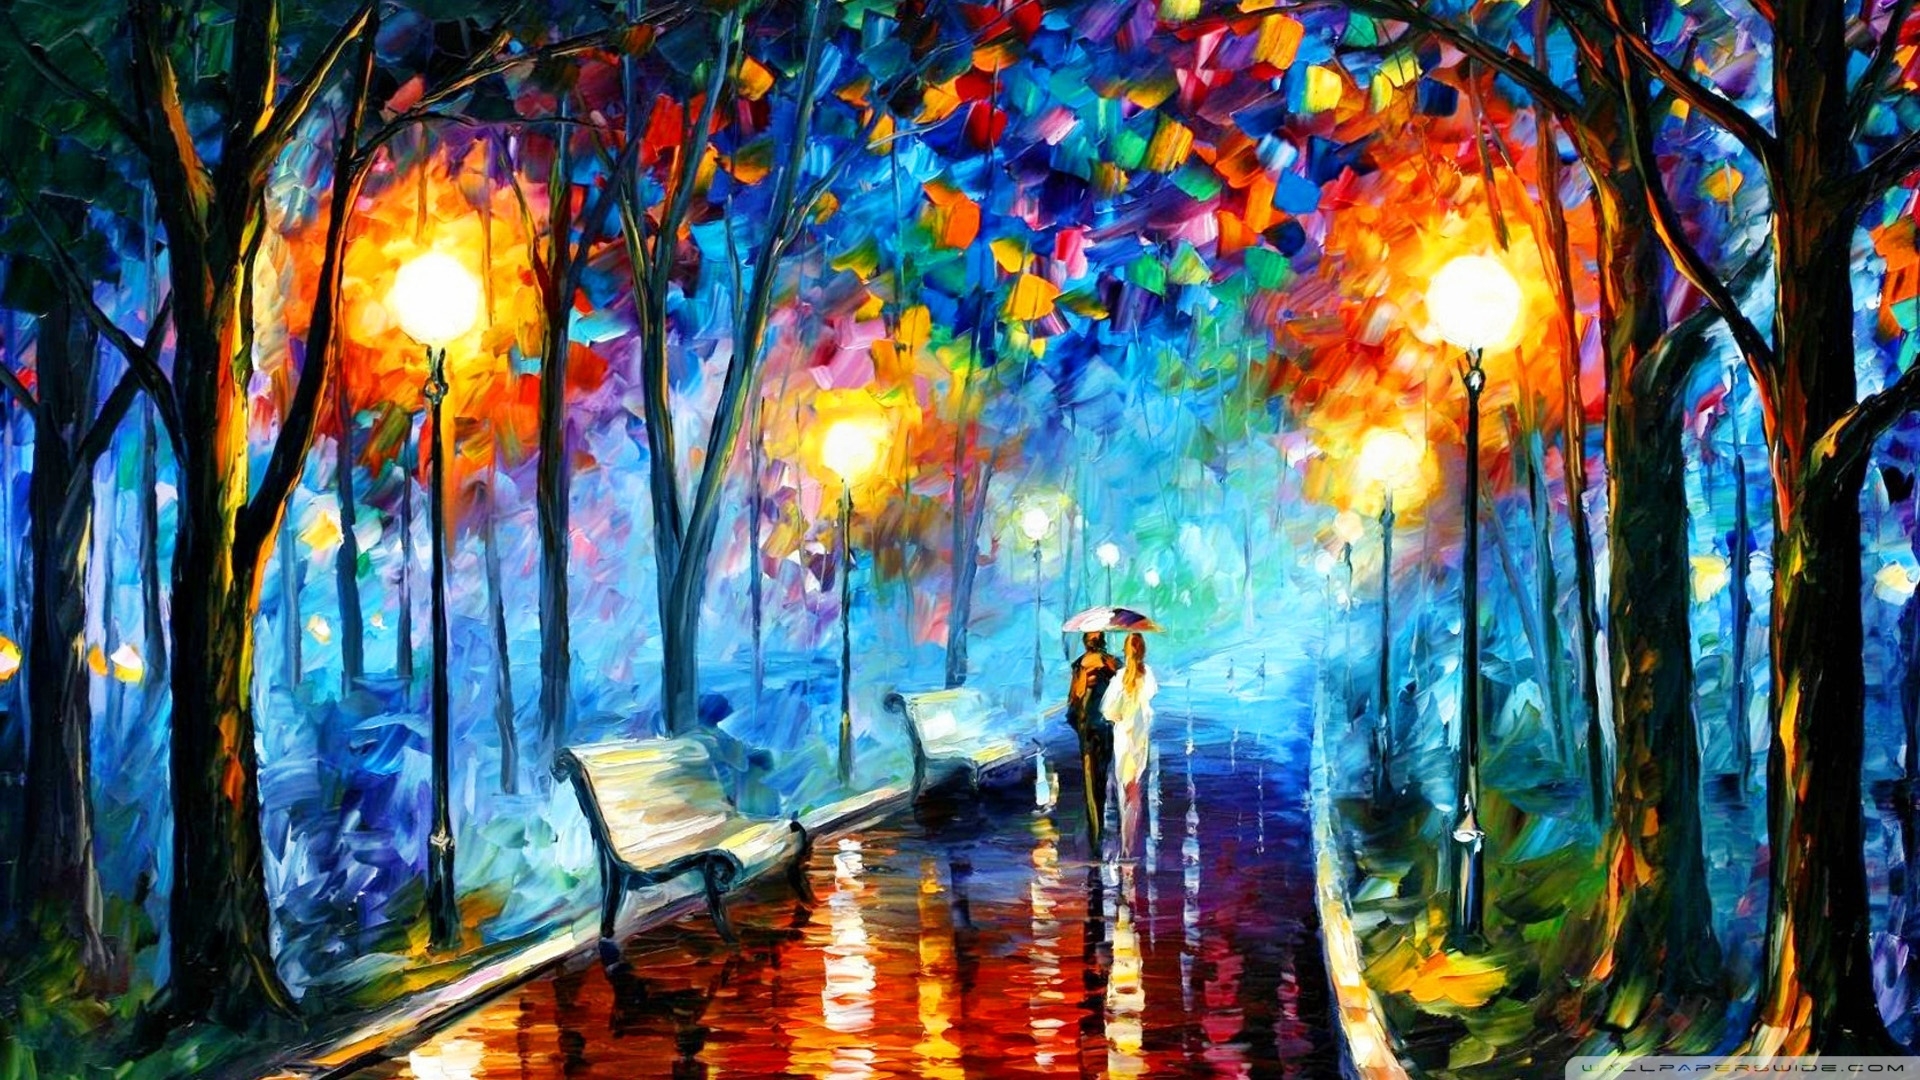 Amazing Modern Abstract Art Oil Painting Image Gallery HD ...